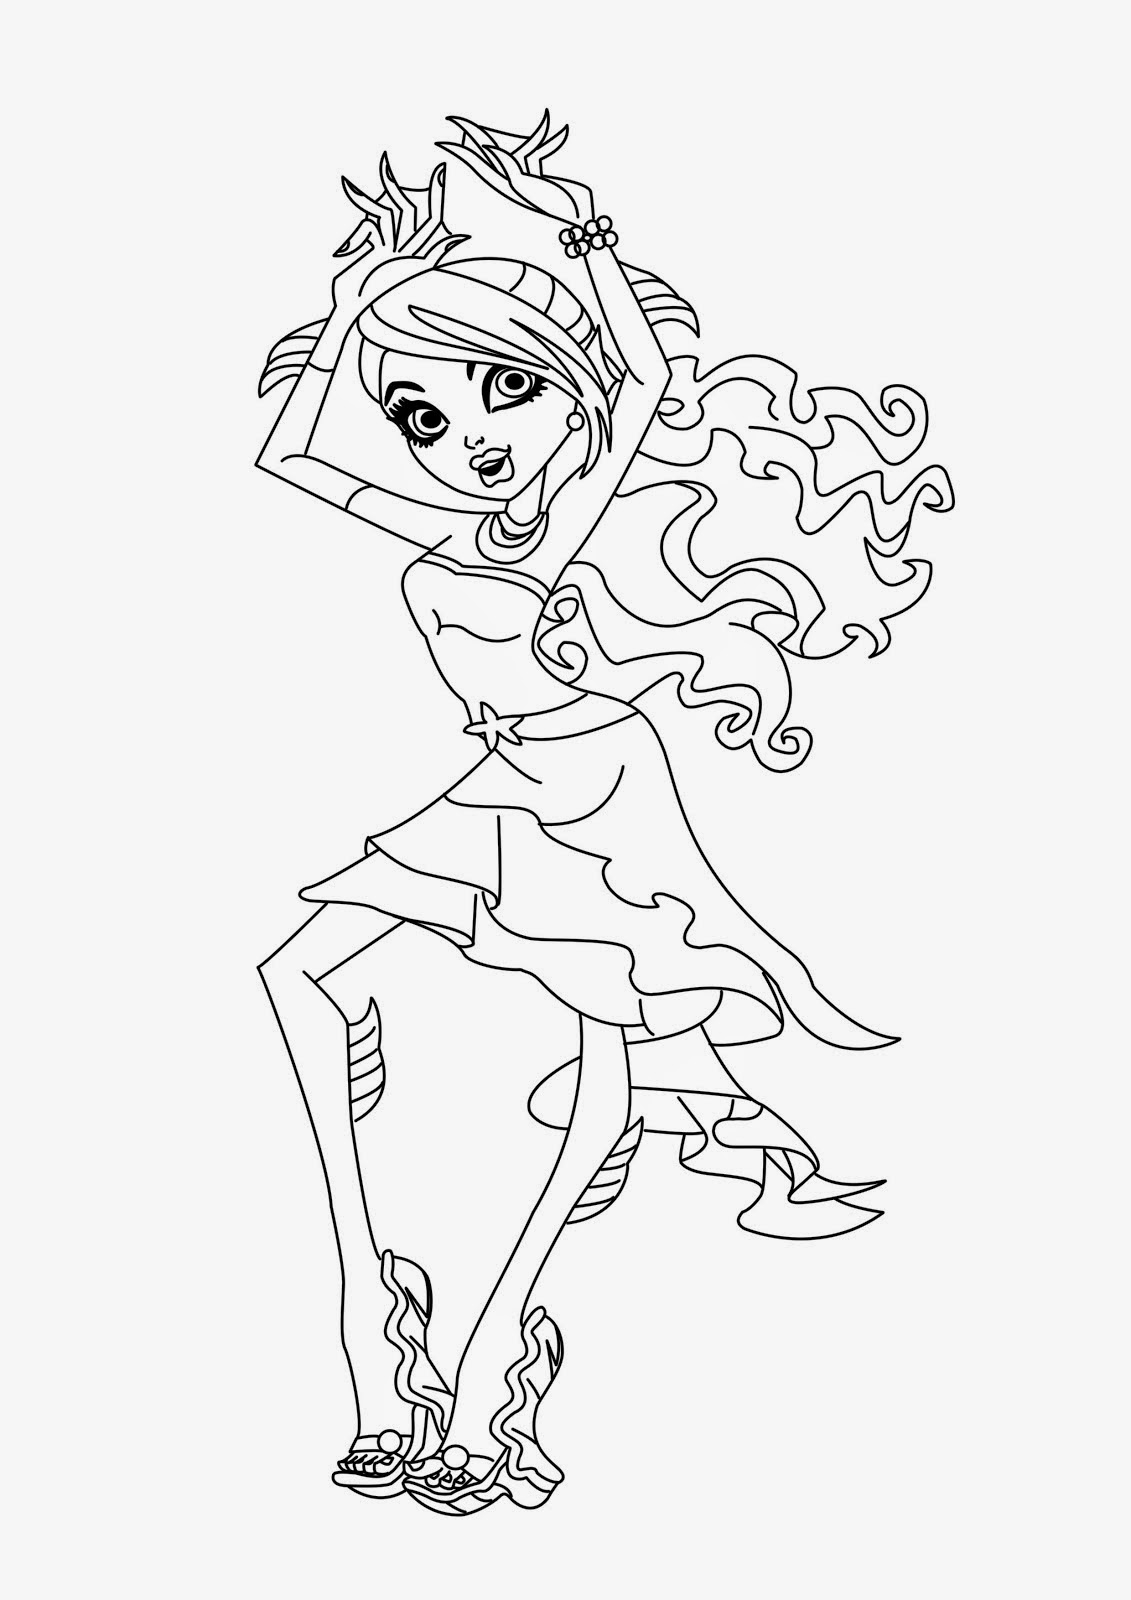 Coloring Pages: Monster High Coloring Pages Free And Printable